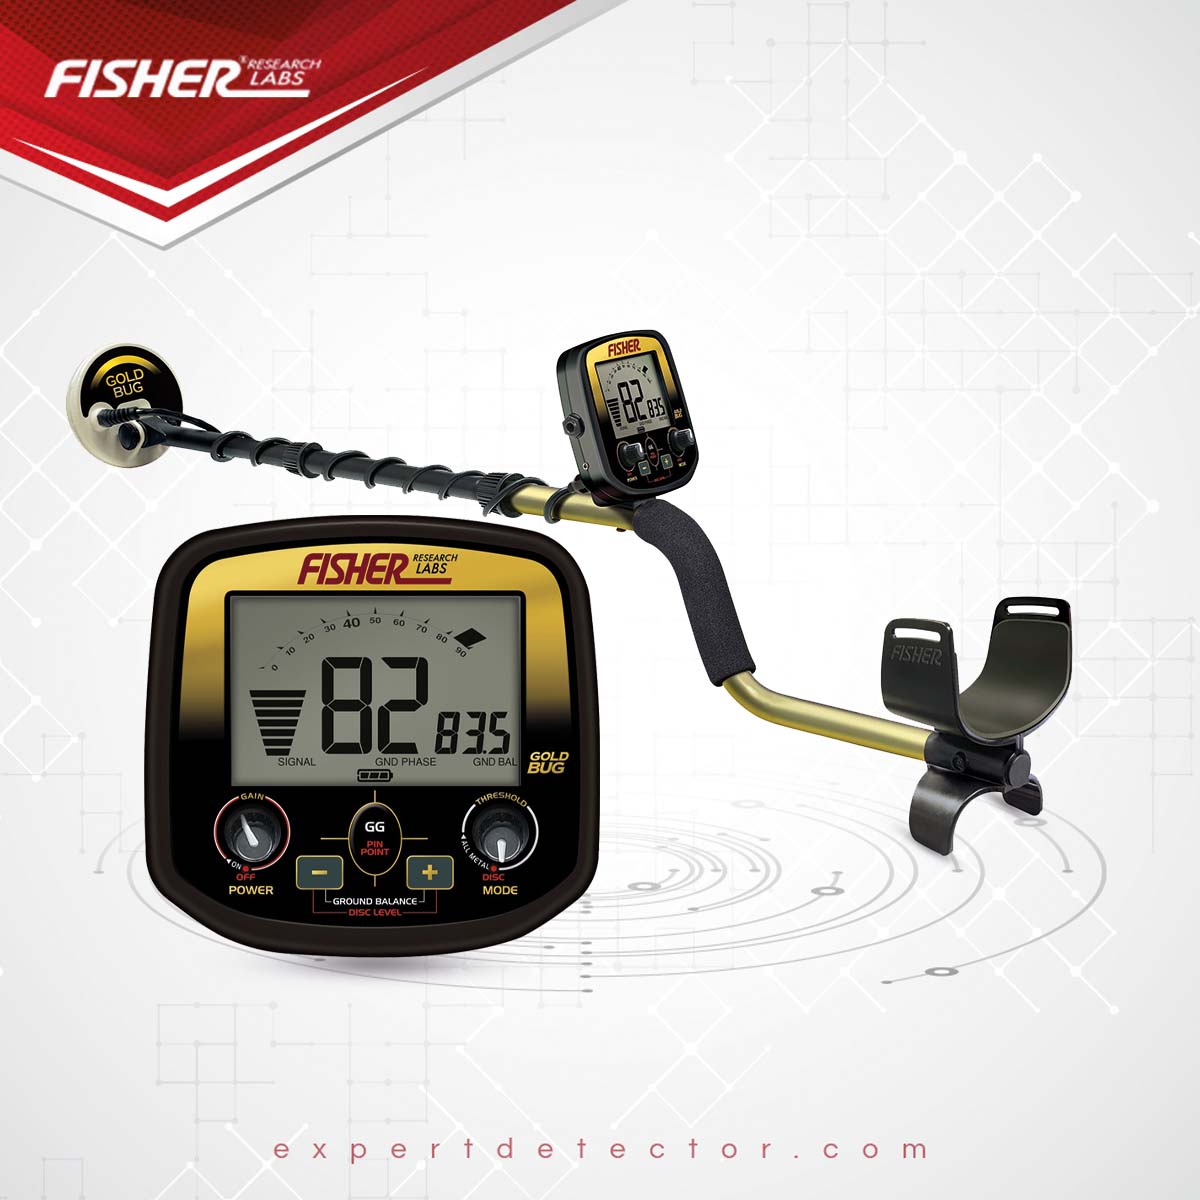 Fisher Gold Bug gold detector